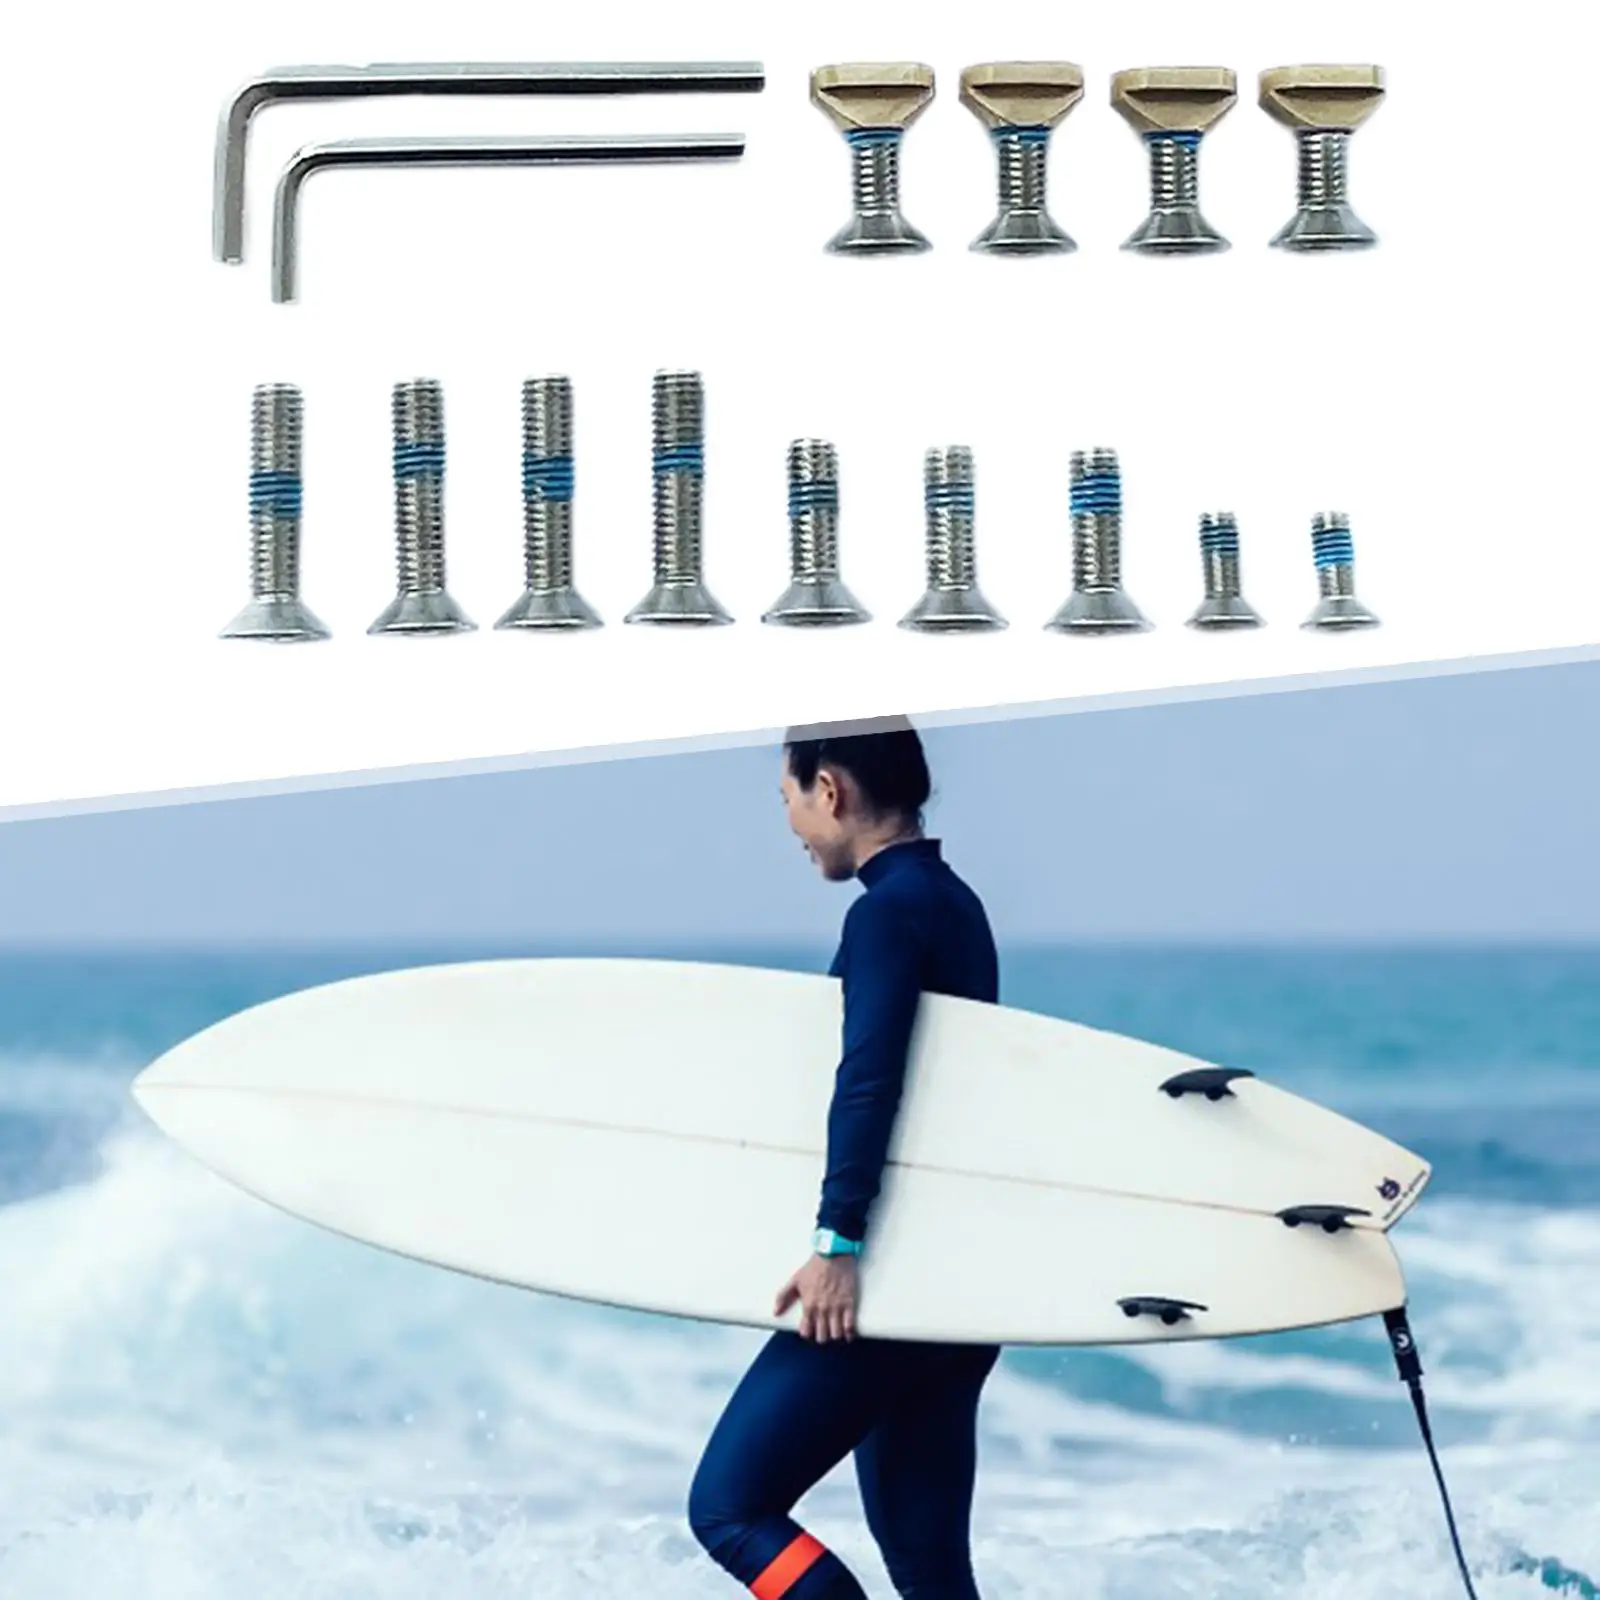 Surfboard Fin Screws Replace Sturdy Surfing Accessories 316 Stainless Steel for Paddleboard Surf Longboard Stand Paddle